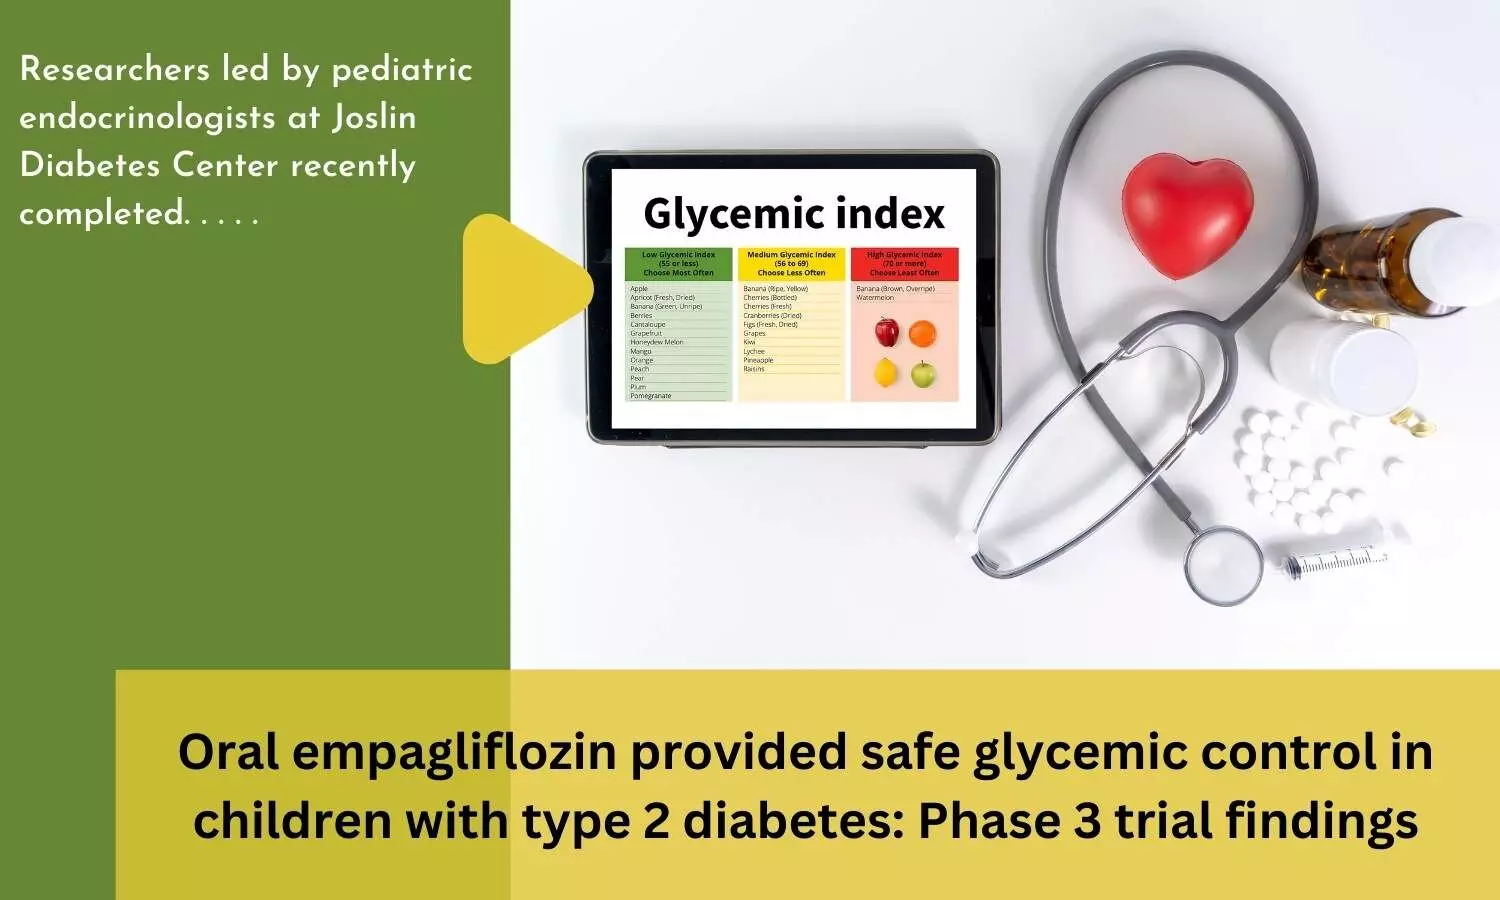 Oral empagliflozin provided safe glycemic control in children with type 2 diabetes: Phase 3 trial findings